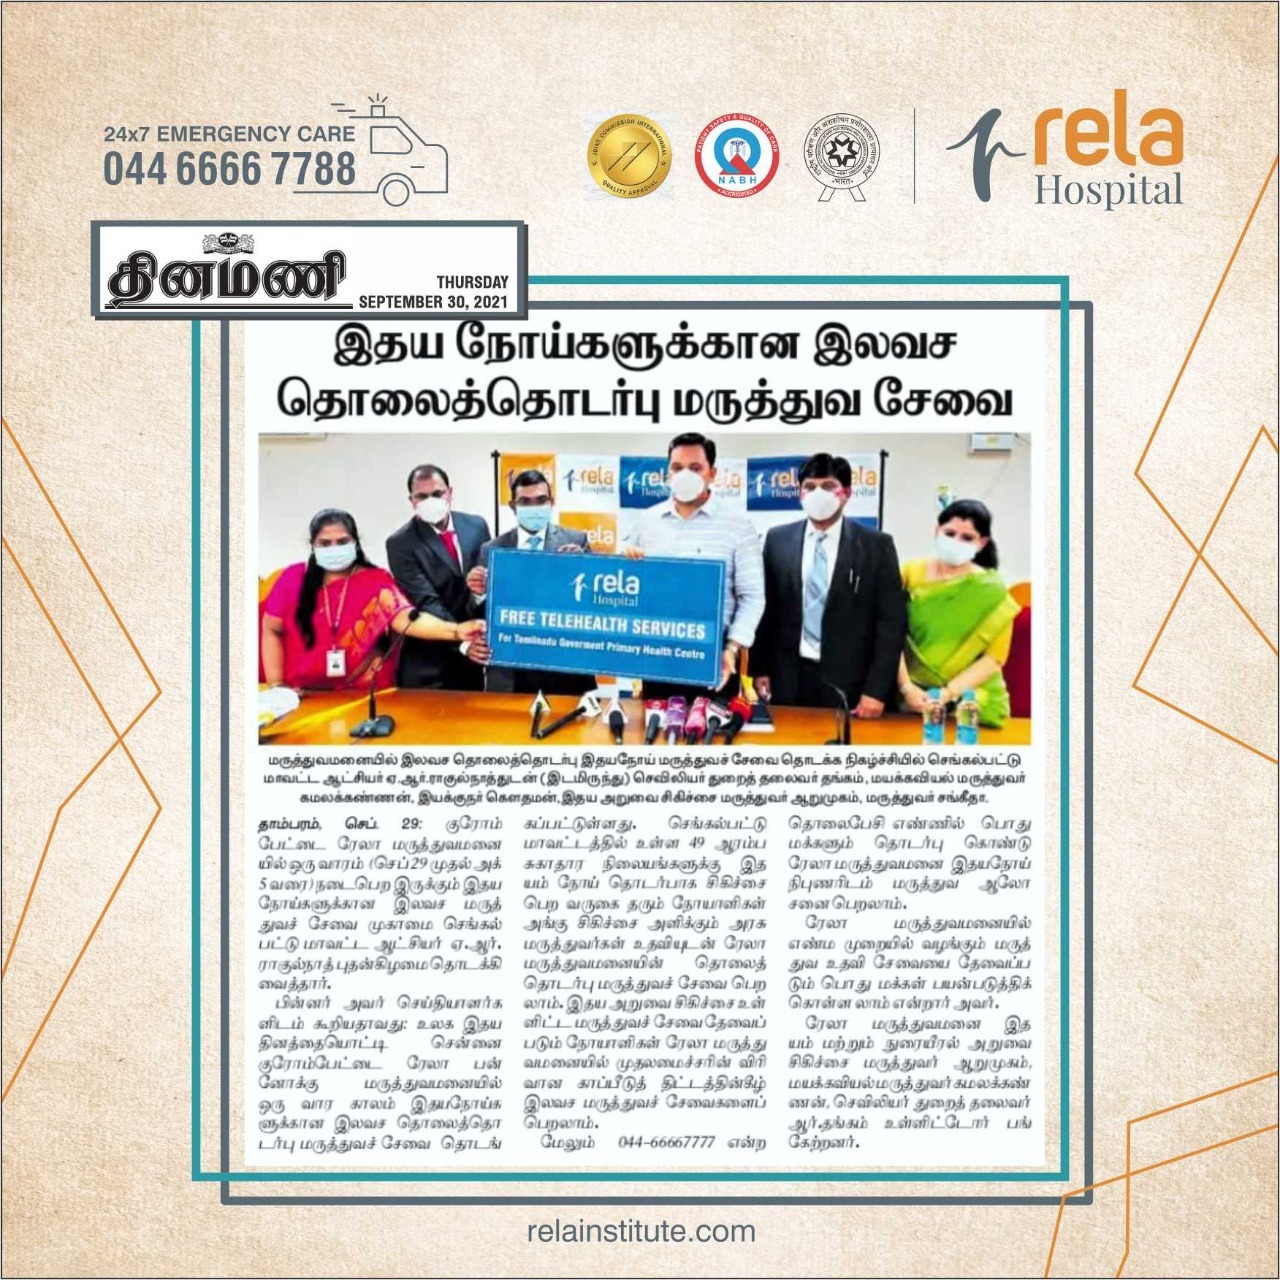 Rela Hospital Launched Free Telehealth Services To Primary Health Centres In Chengalpattu District